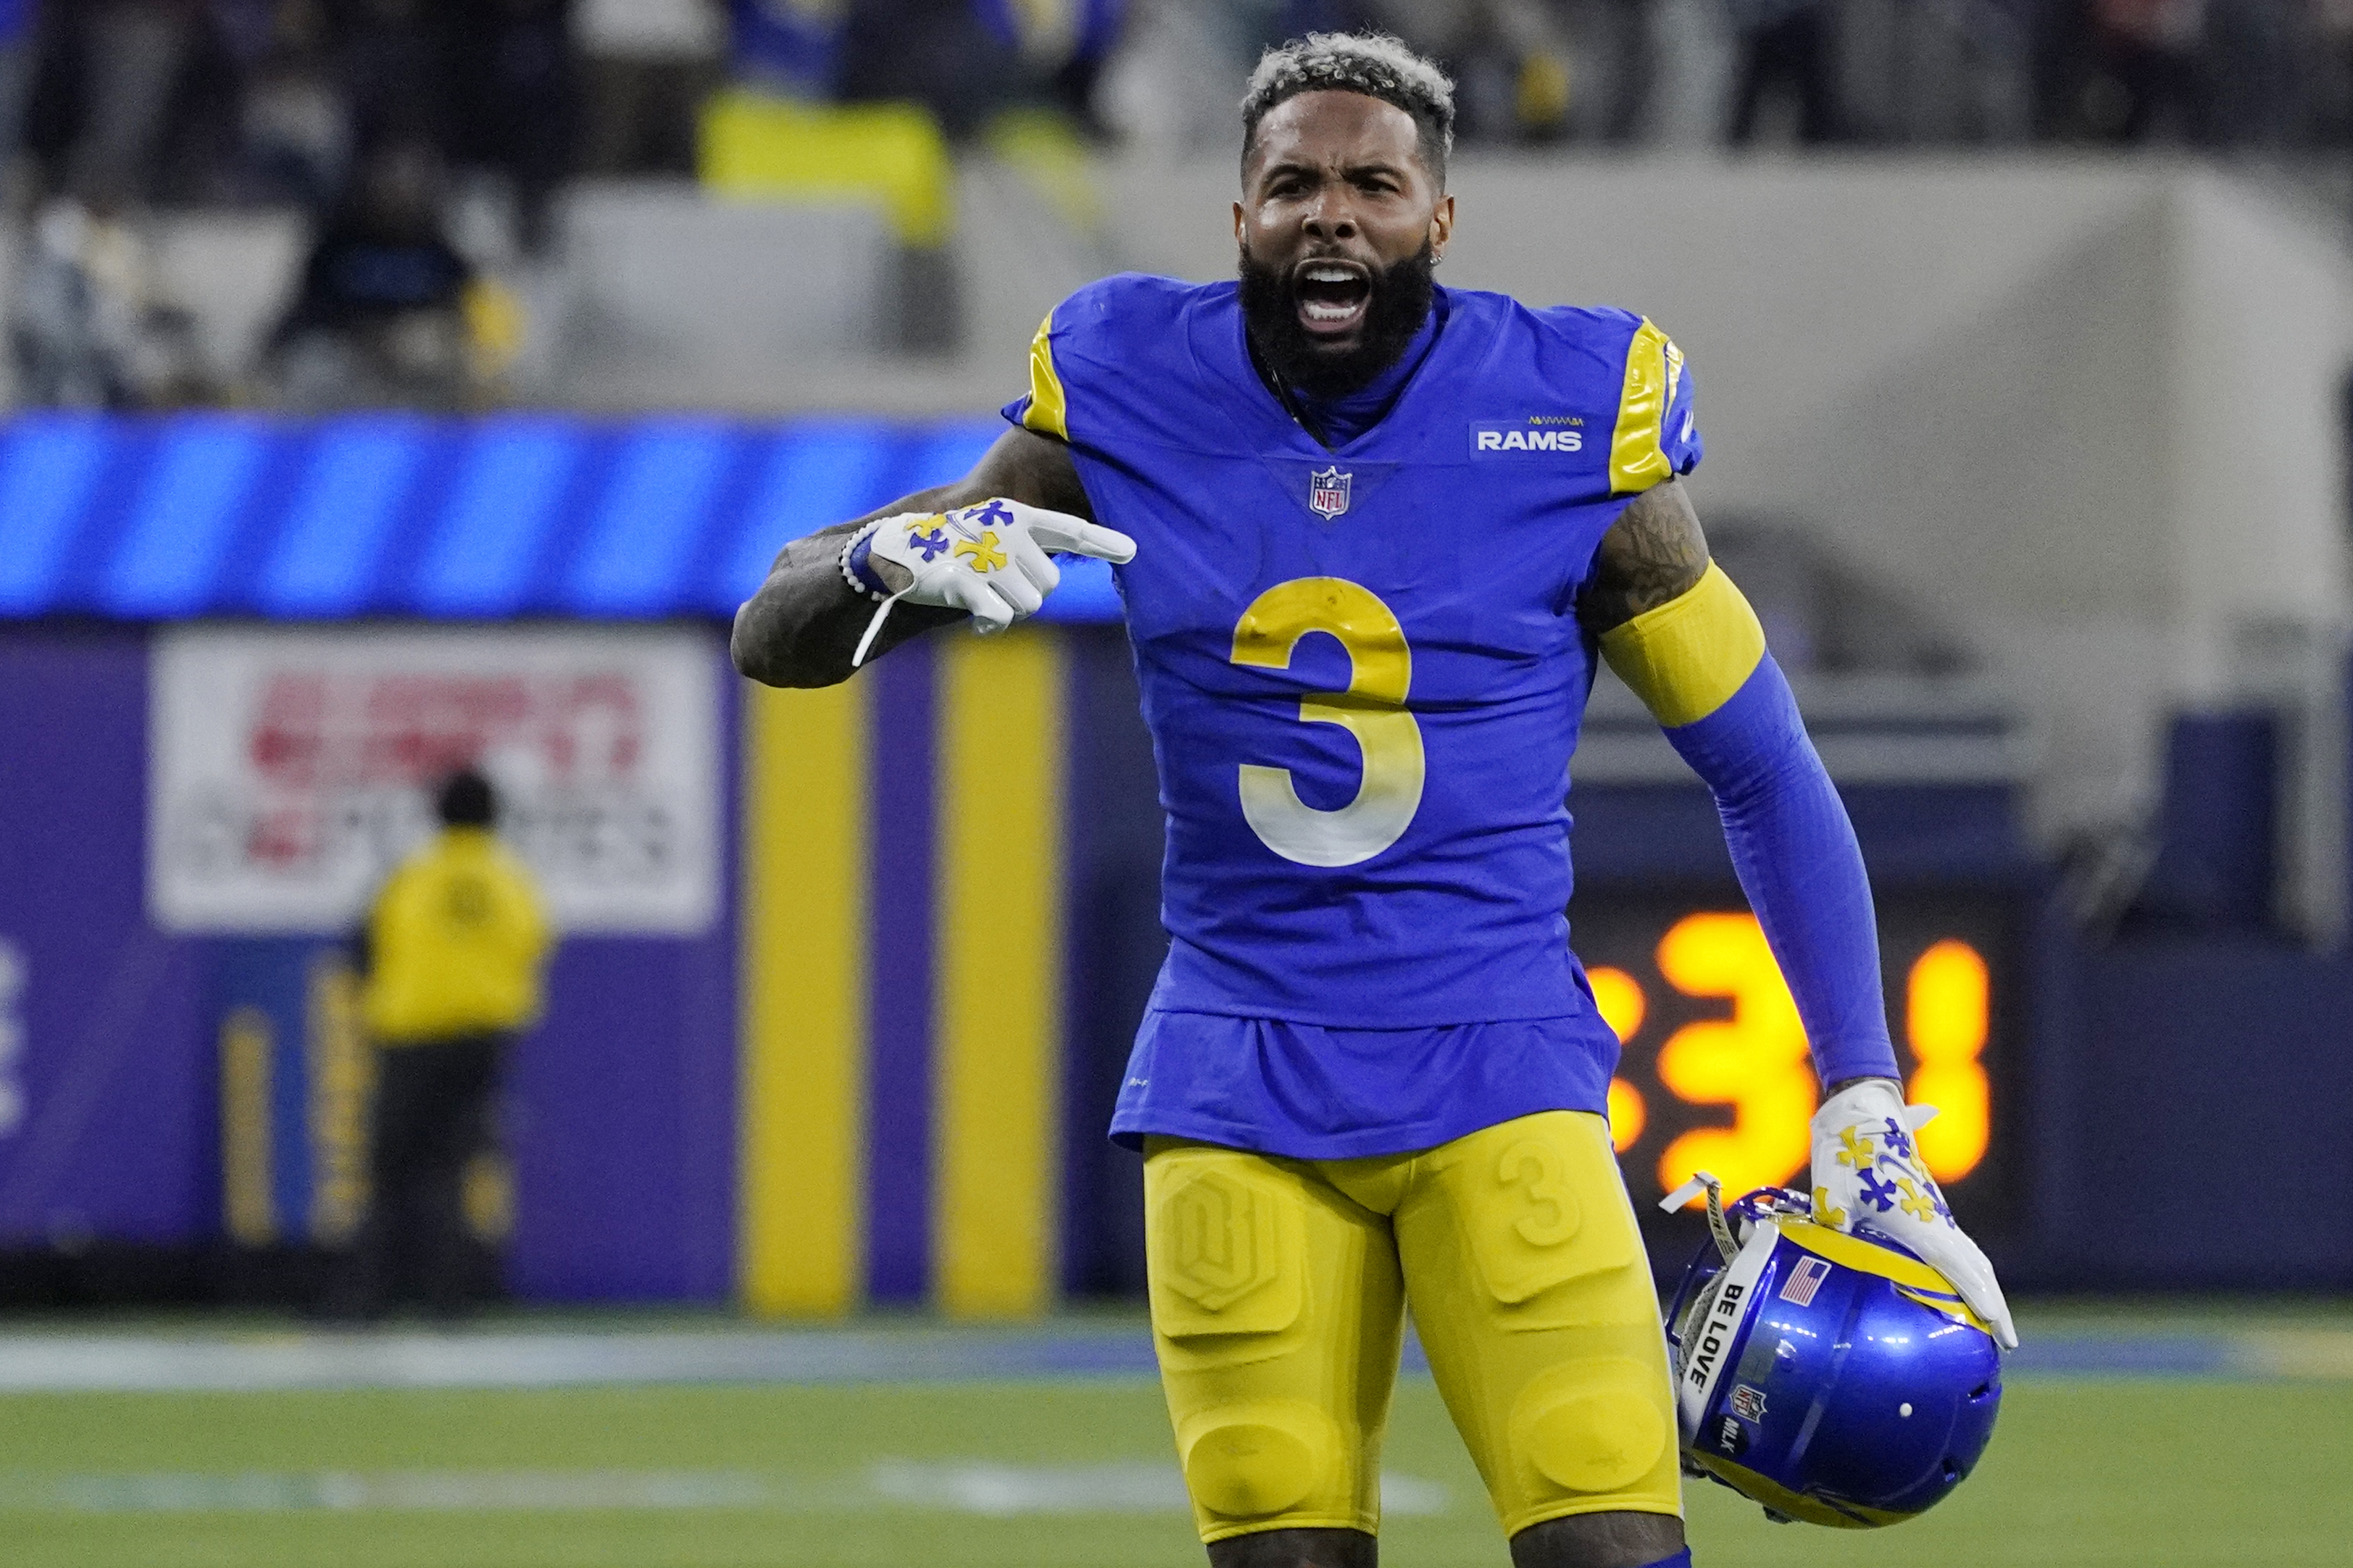 Why Can't Giants Get Players Like This? Rams' Odell Beckham Jr. Does It All In Wild Card Win Vs. Cardinals